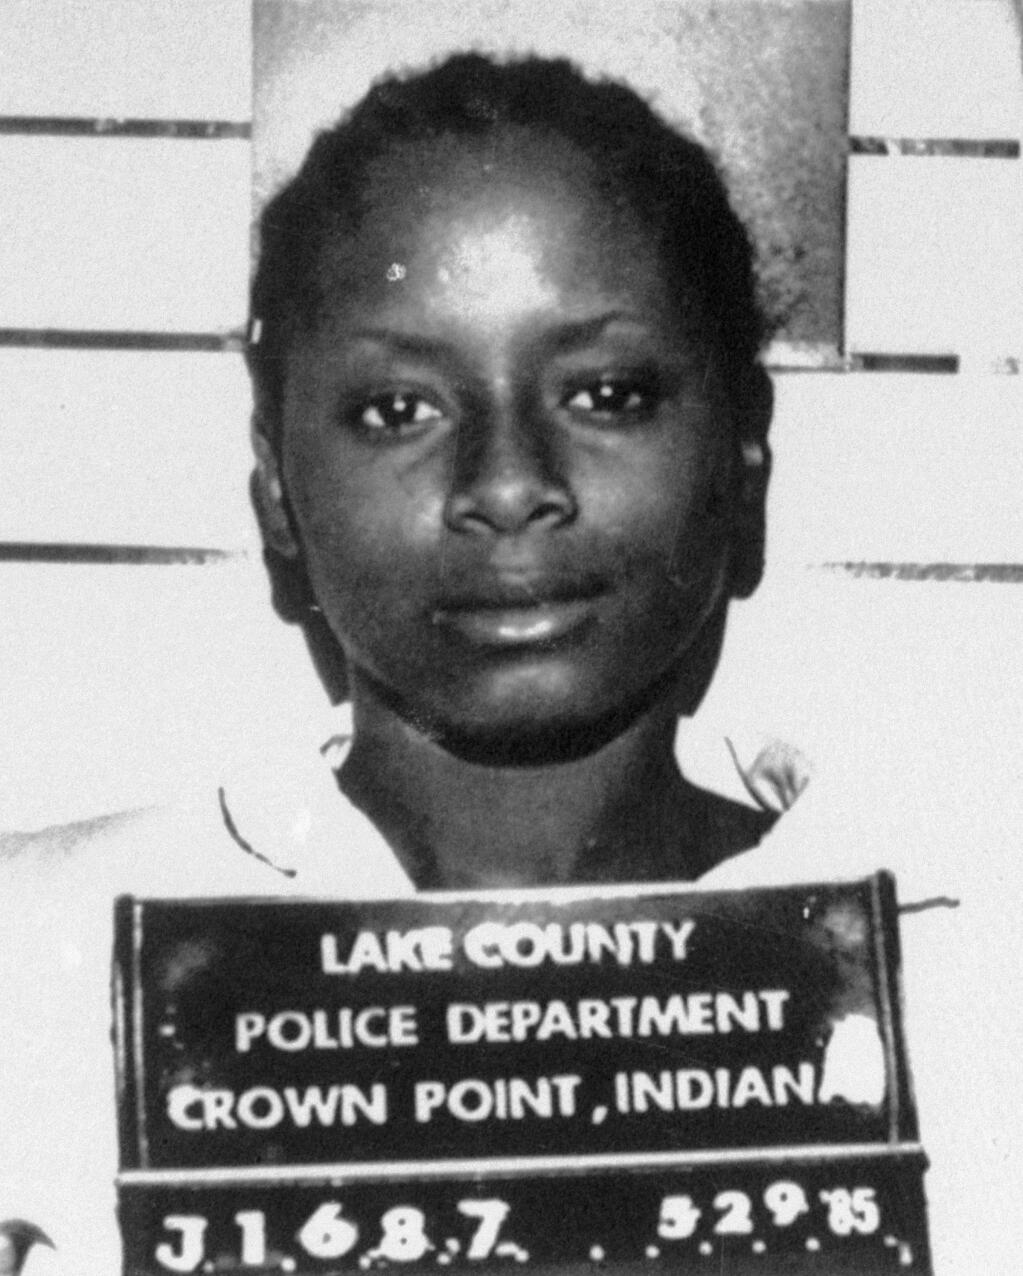 This May 29, 1985 booking photo provided by the Lake County Police Department shows Paula Cooper. In 1986, Cooper pleaded guilty to the murder of 78-year-old Bible teacher Ruth Pelke. At the age of 16, she was sentenced to death, but in 1989, the Indiana Supreme Court spared Cooper's life, citing a recent state law and a U.S. Supreme Court decision that barred executions of those under 16. (Lake County Police Department via AP)